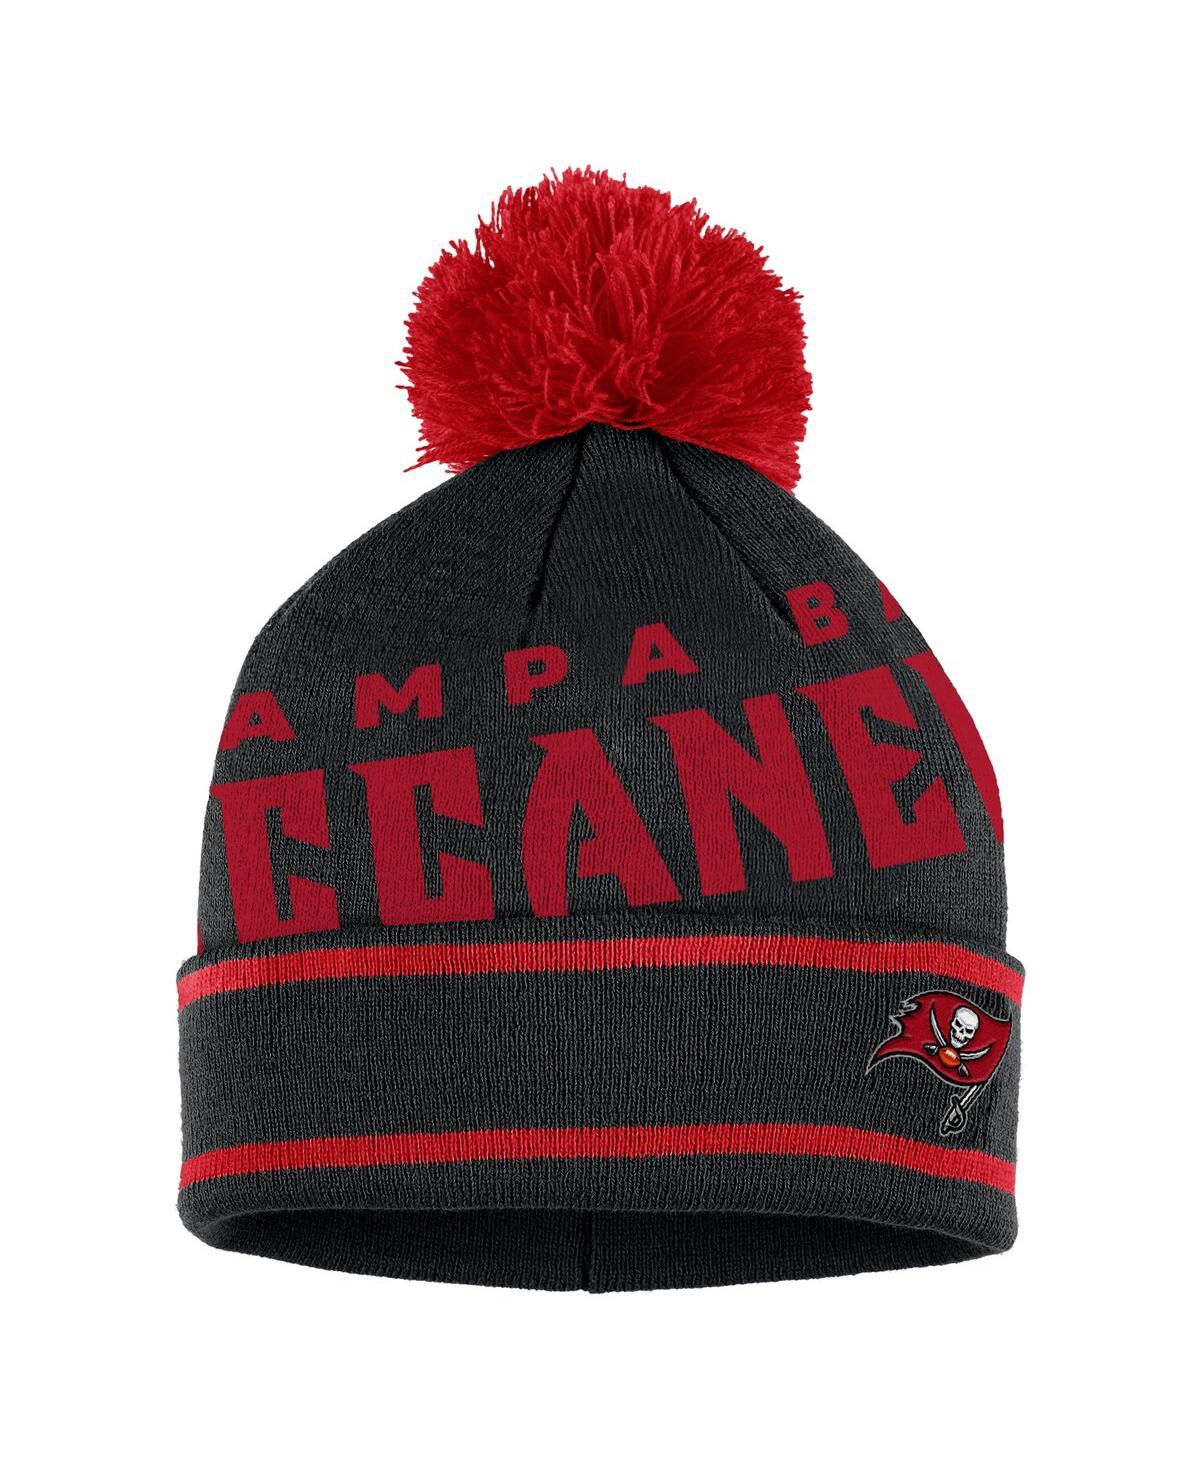 Shop Wear By Erin Andrews Women's  Black Tampa Bay Buccaneers Double Jacquard Cuffed Knit Hat With Pom And